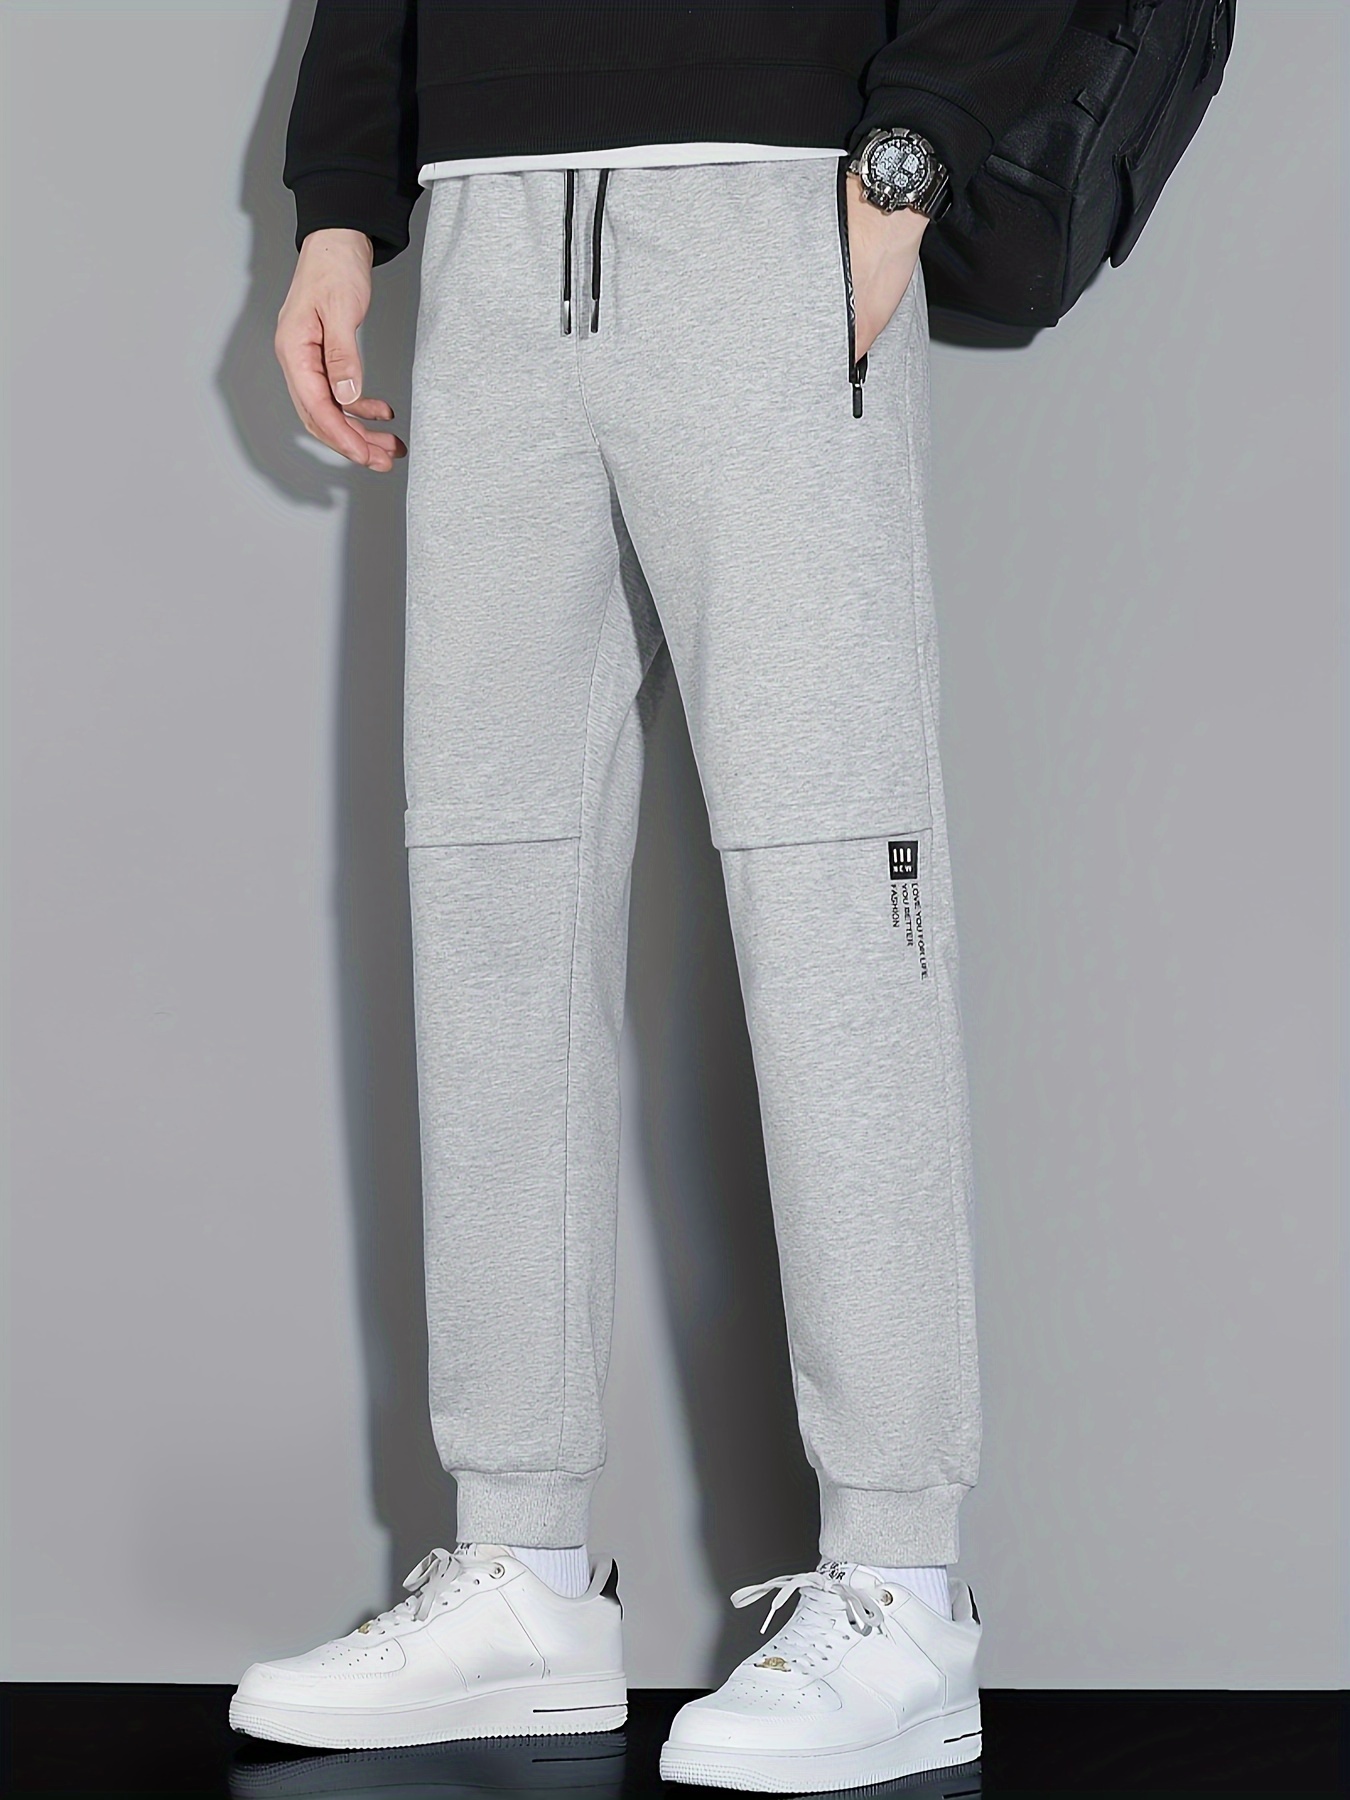 Casual Sports Pants, Drawstring Sweatpants Gray For Outdoor